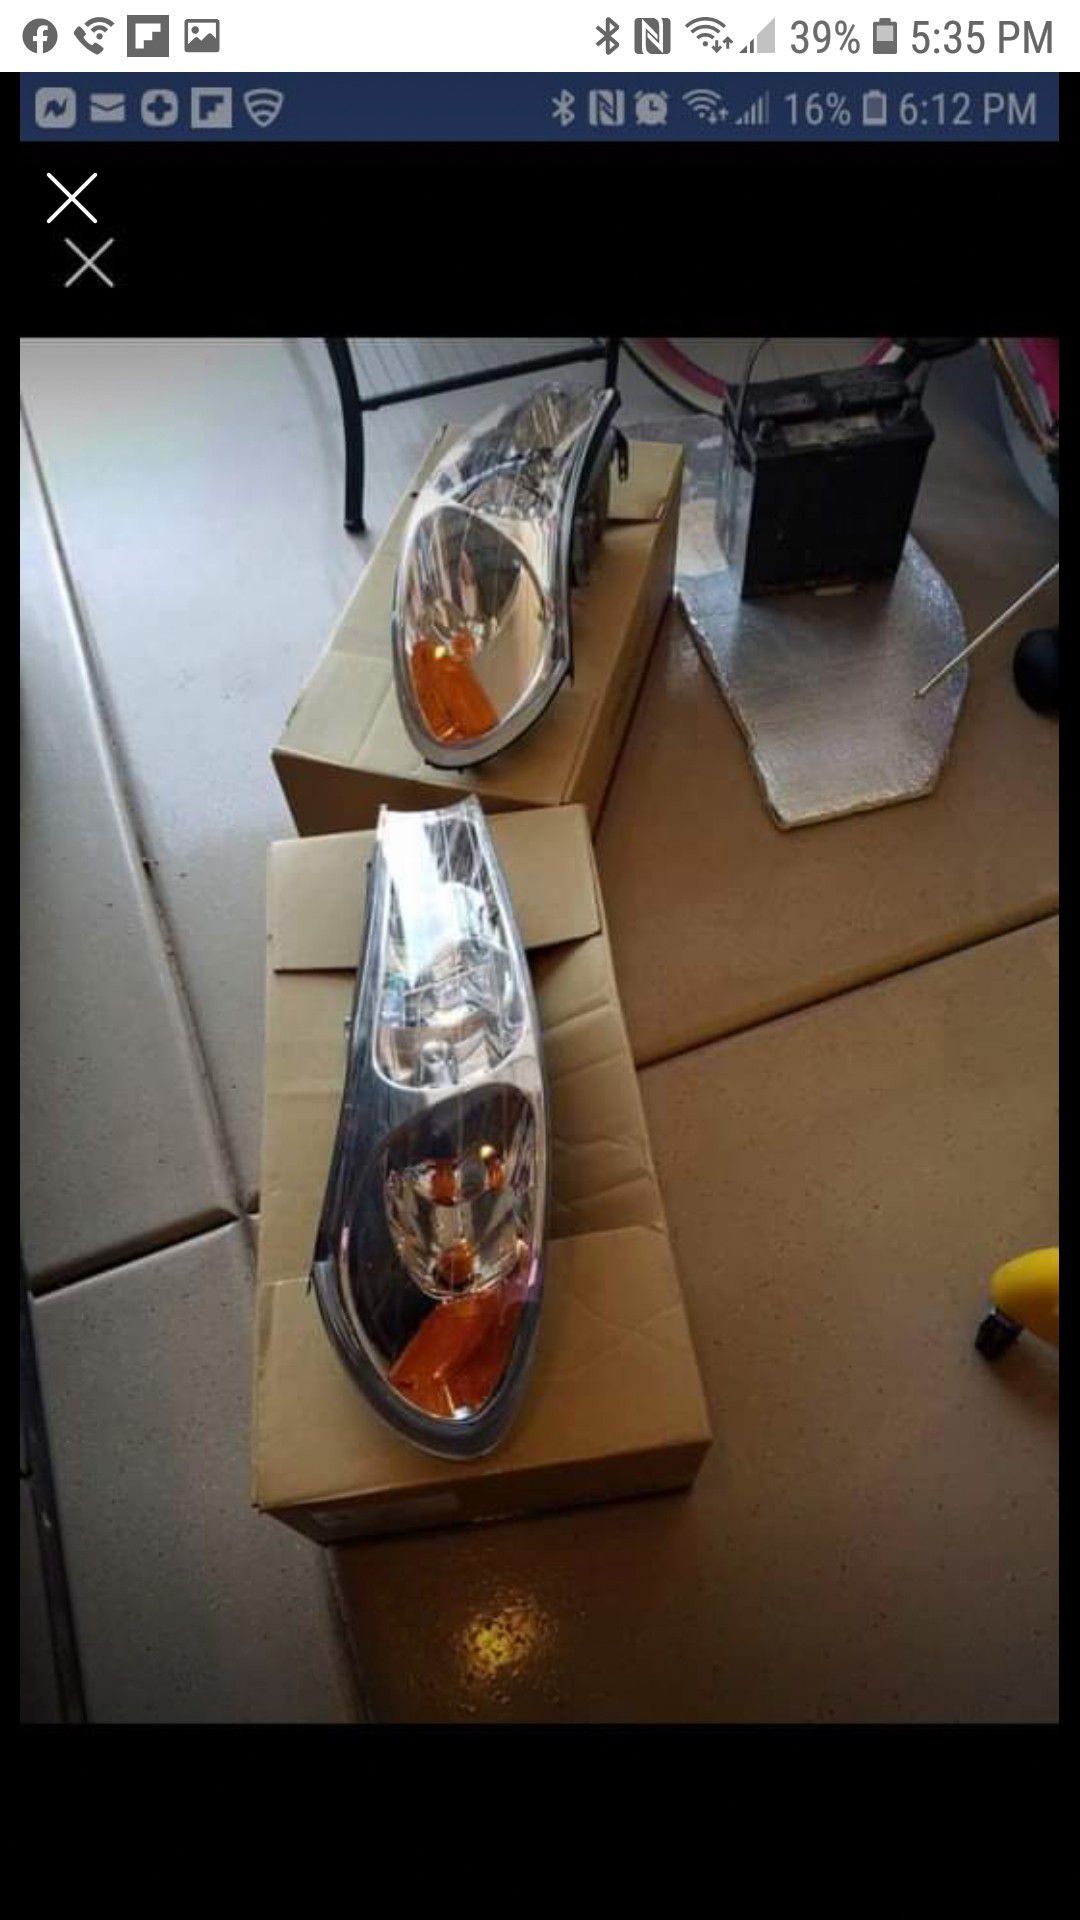 Brand new headlight for 1998 Ford Contour